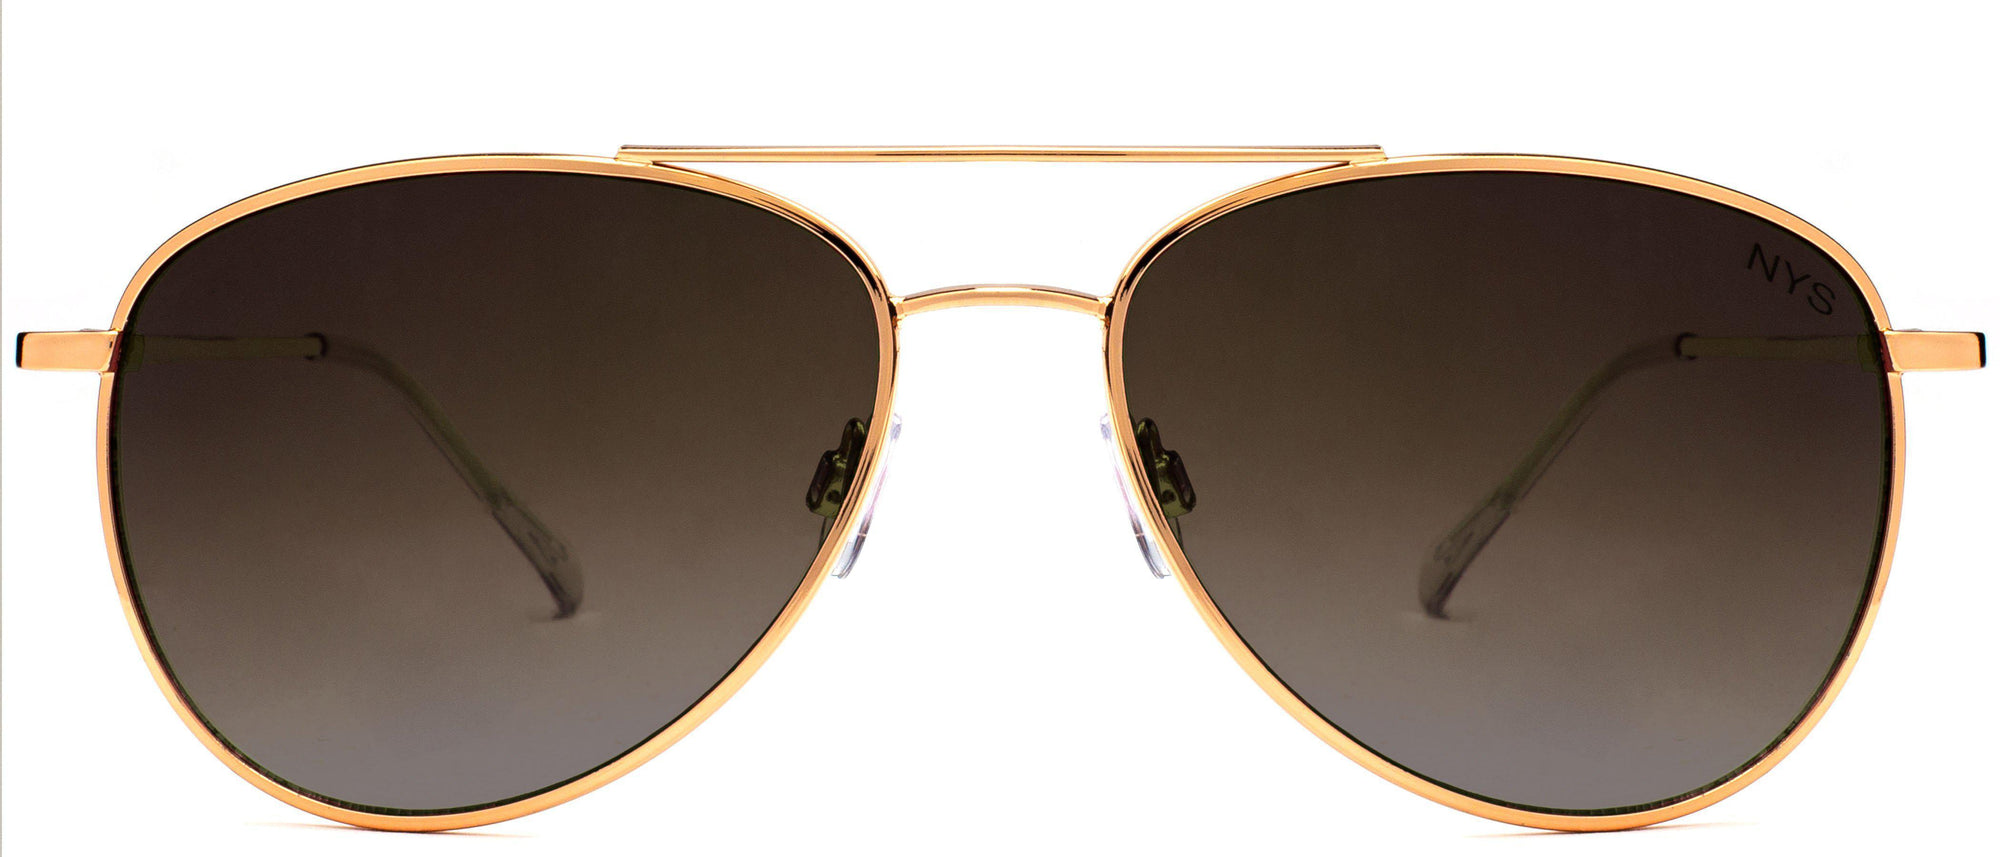 Pearl Street New York - Sunglasses NYS Collection Eyewear Gold/Brown